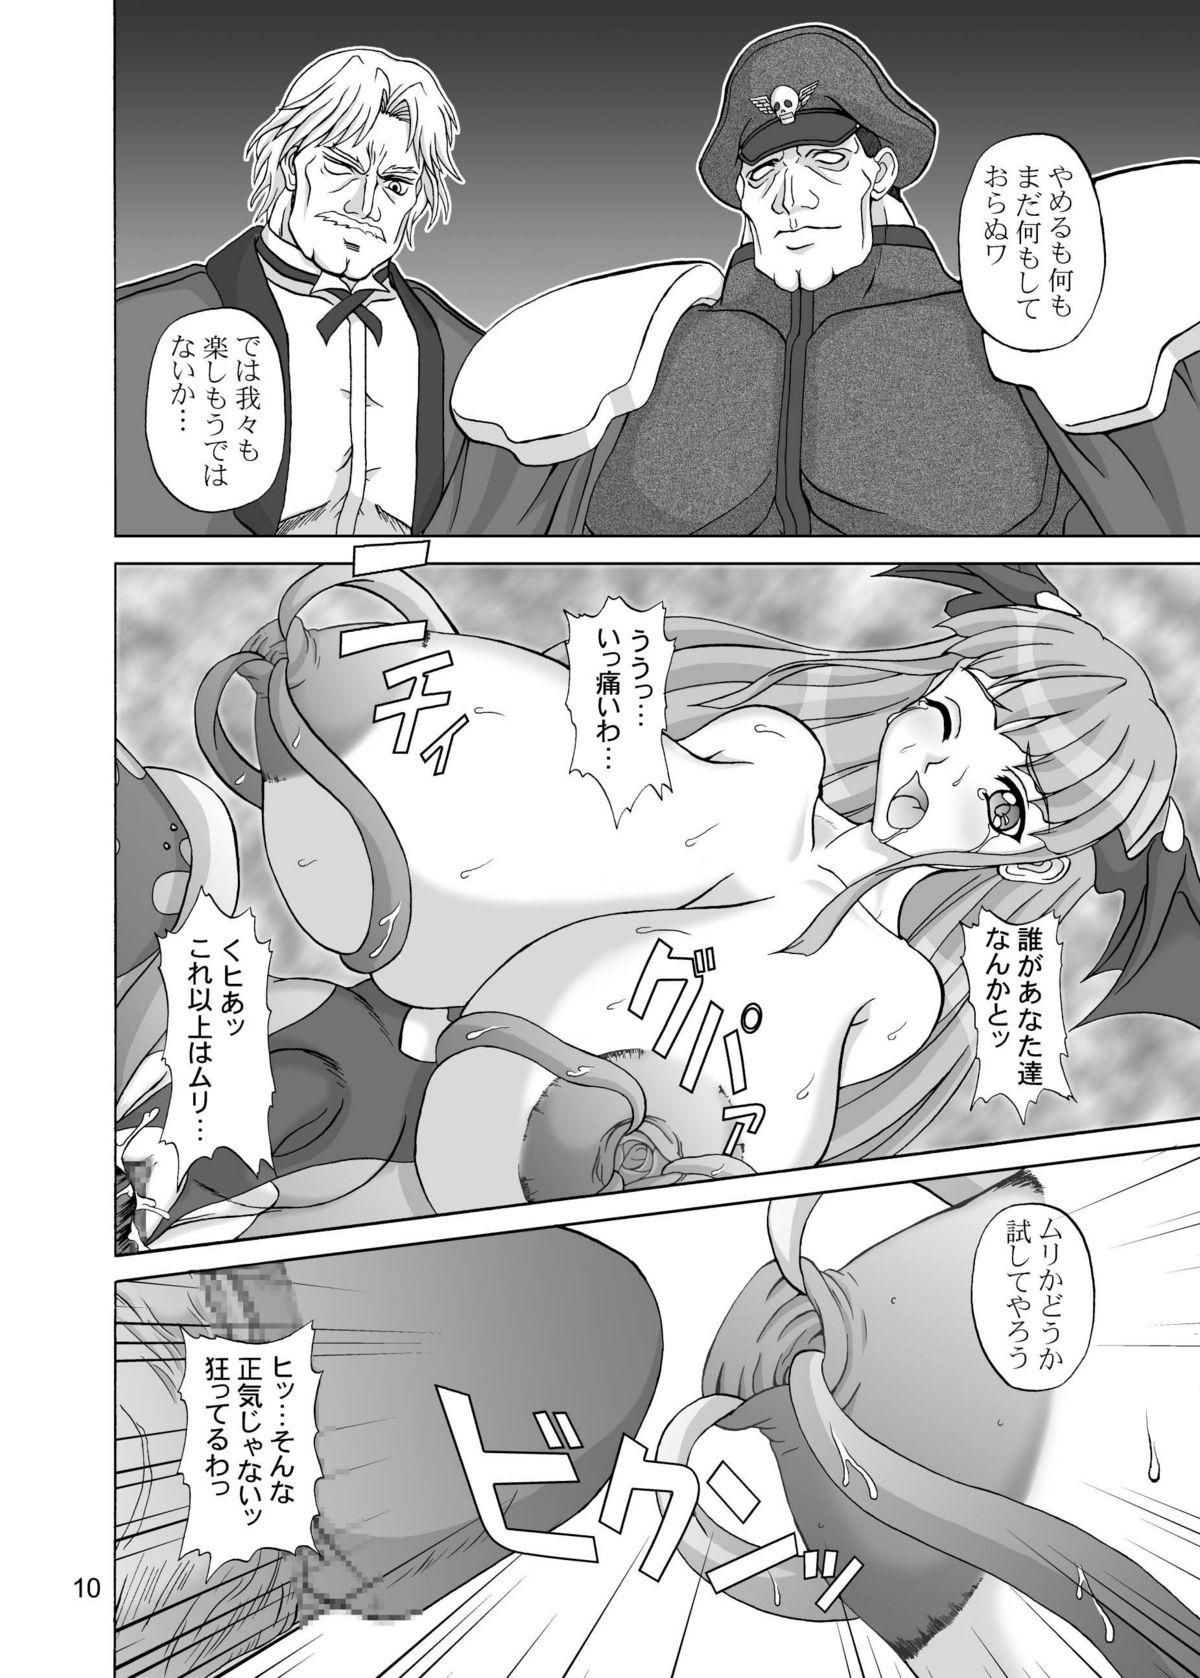 Novinha Insanity 2 - King of fighters Darkstalkers Pussy Lick - Page 9